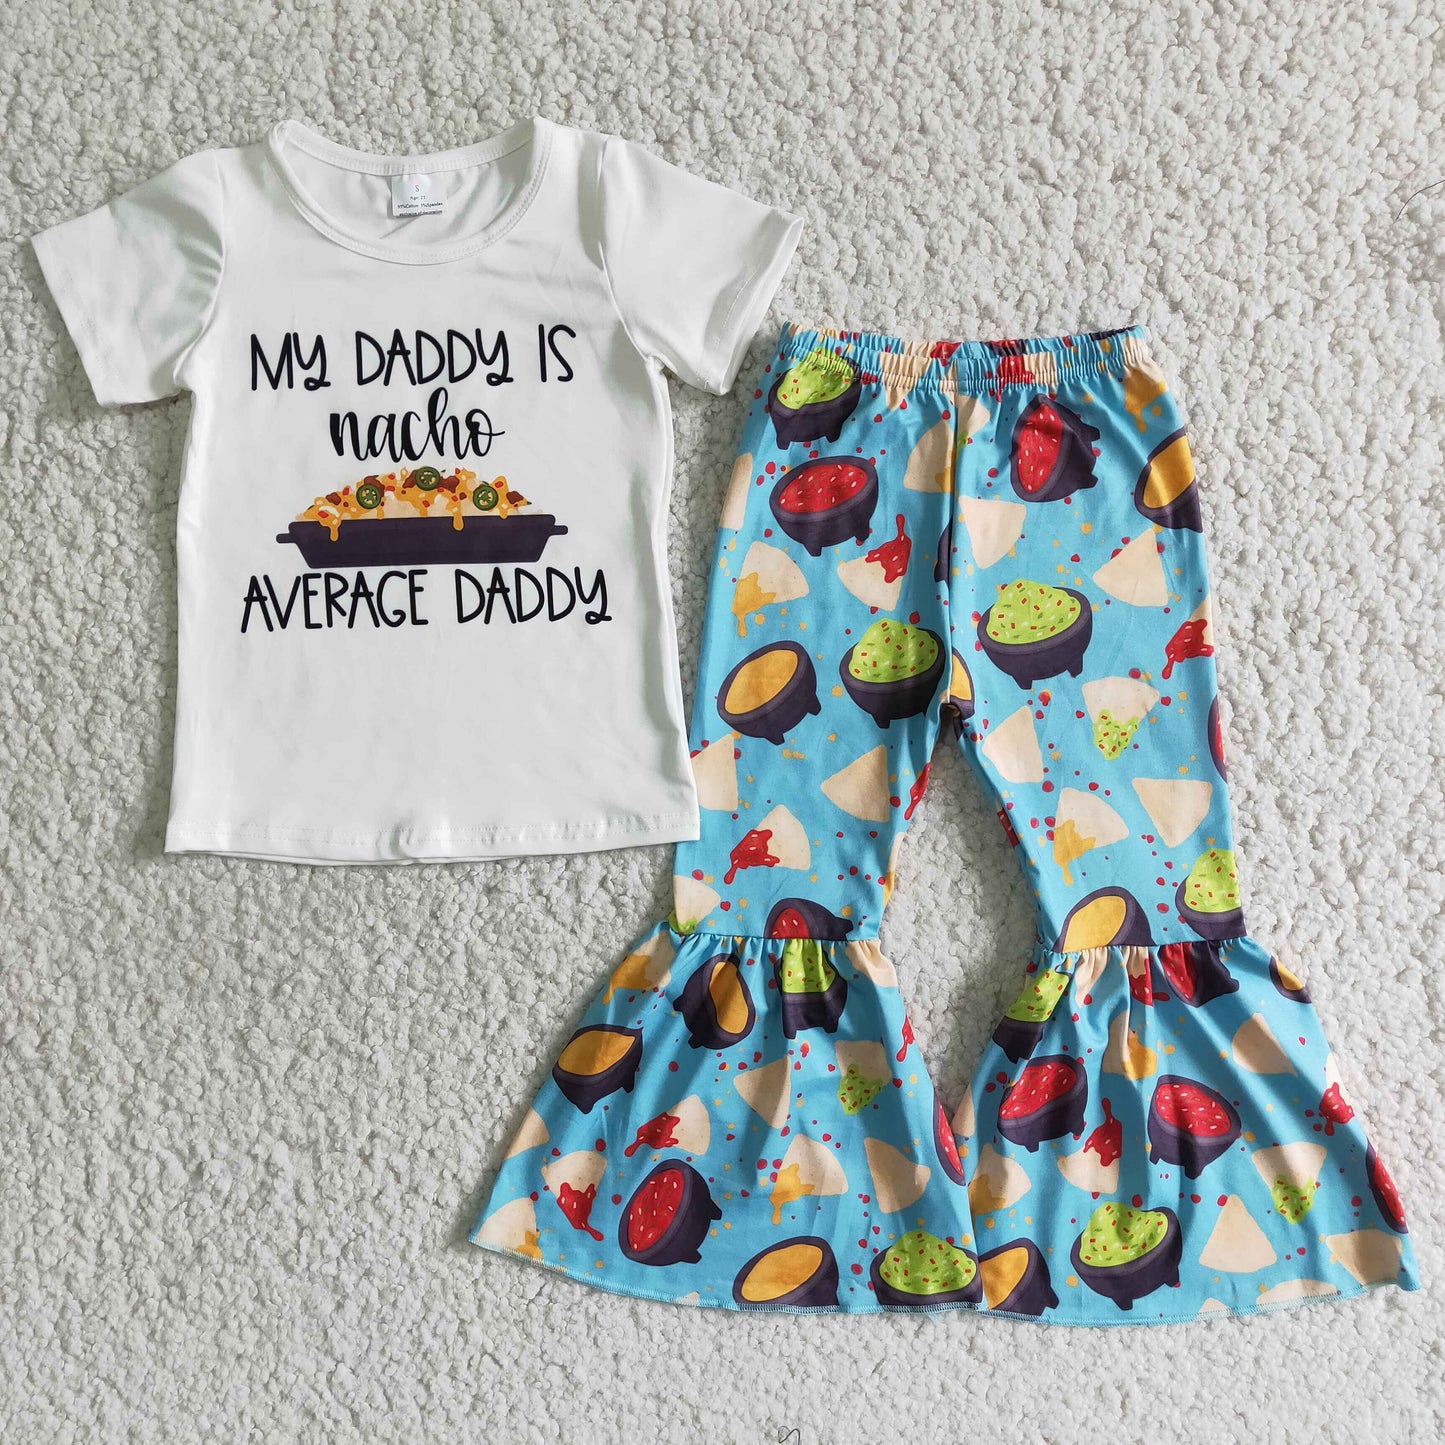 My daddy is nacho average daddy 2pcs outfit